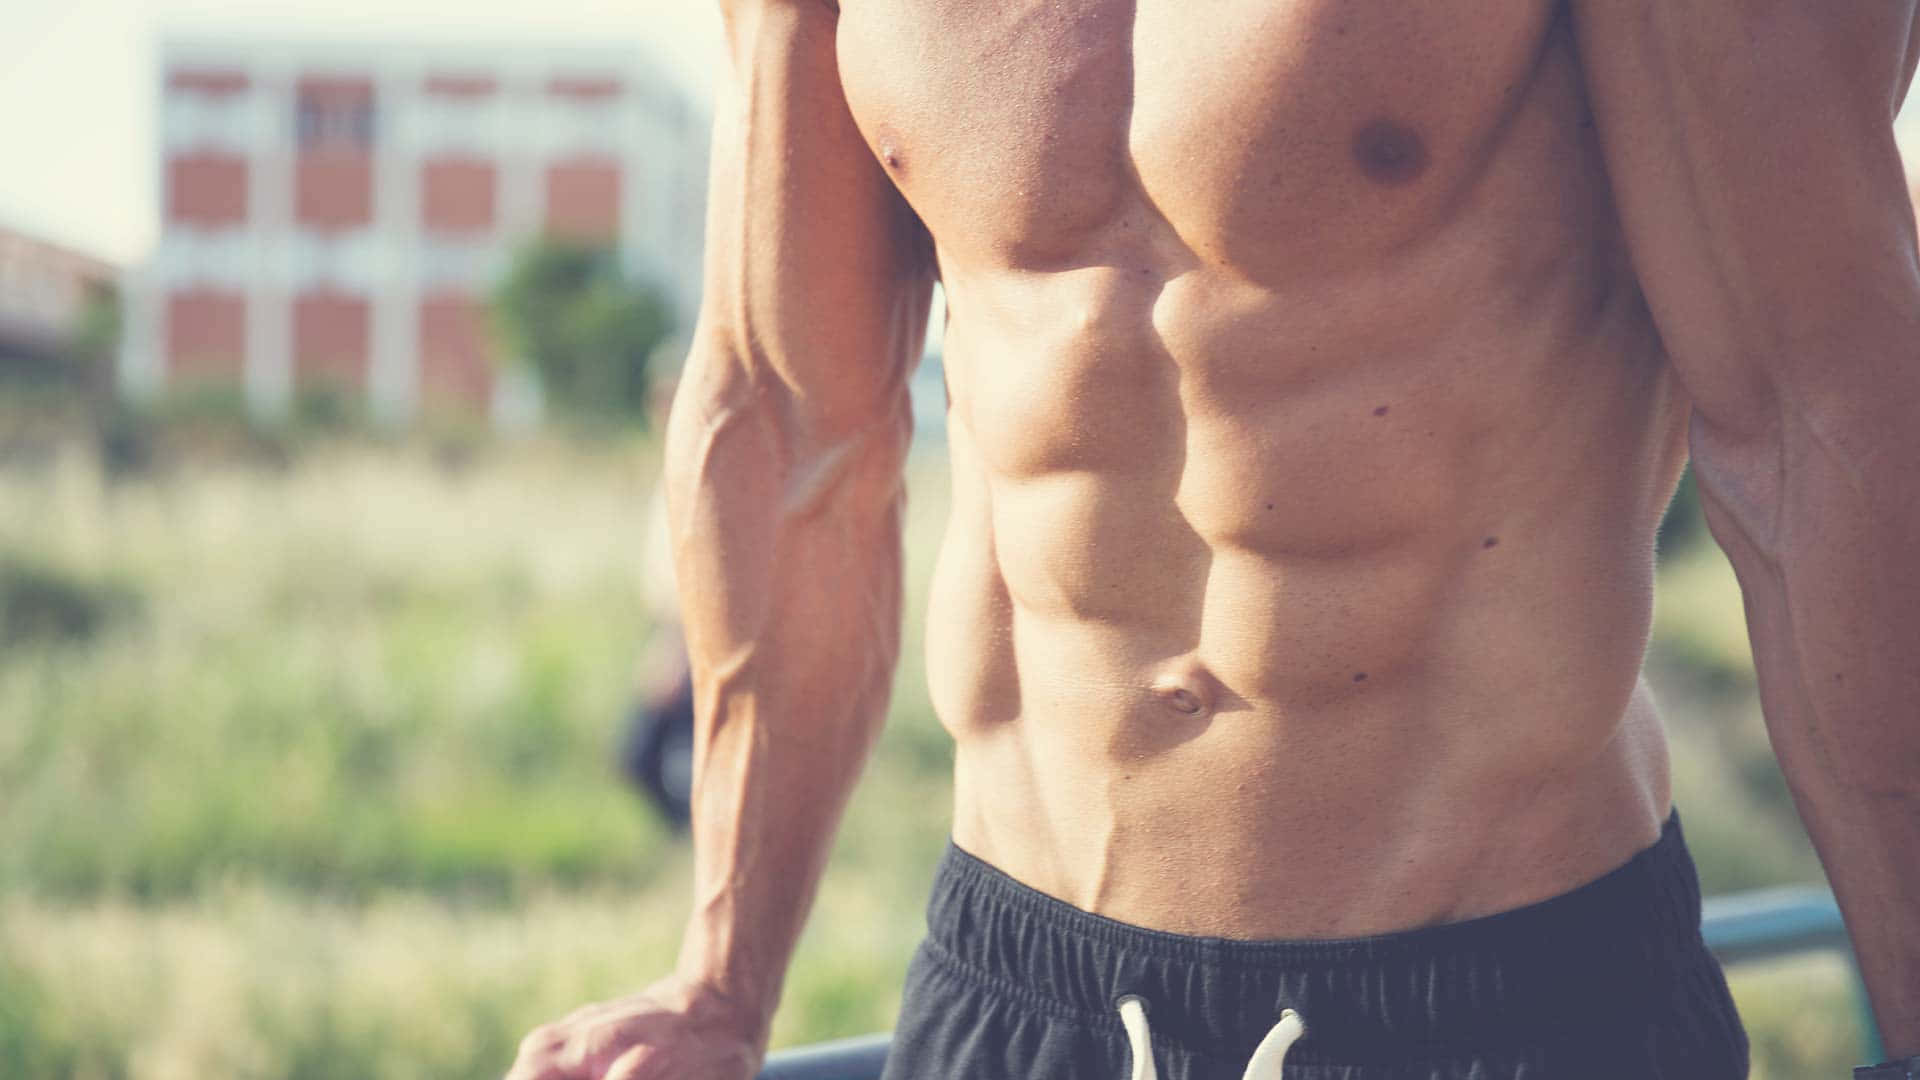 Abs Buff Man Calisthenics Outdoors Picture